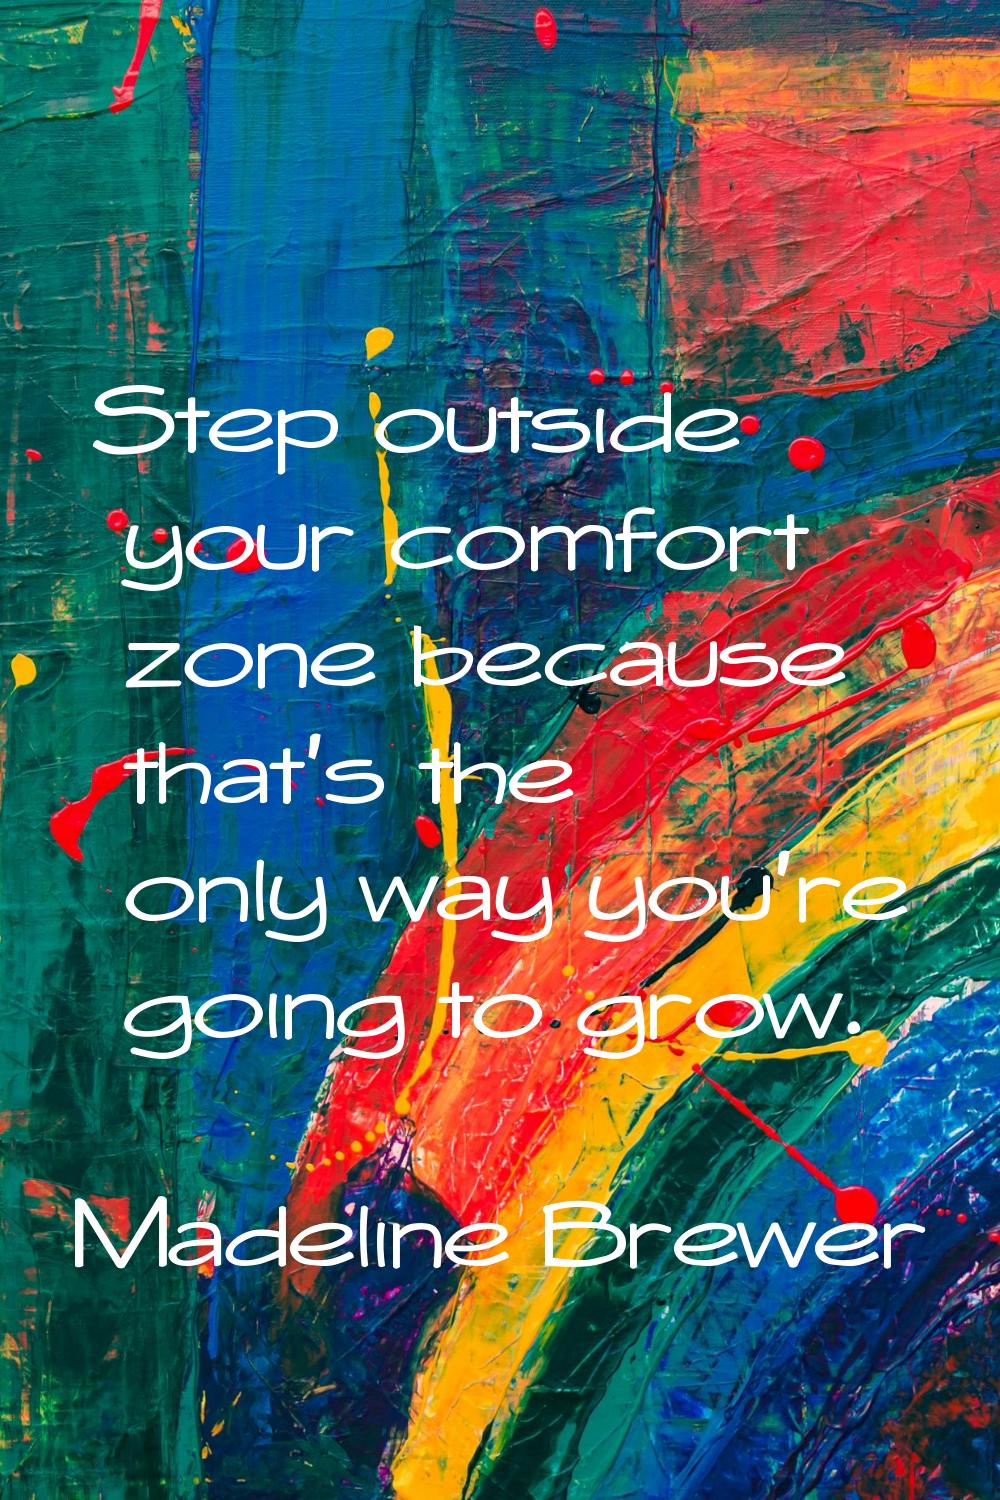 Step outside your comfort zone because that's the only way you're going to grow.